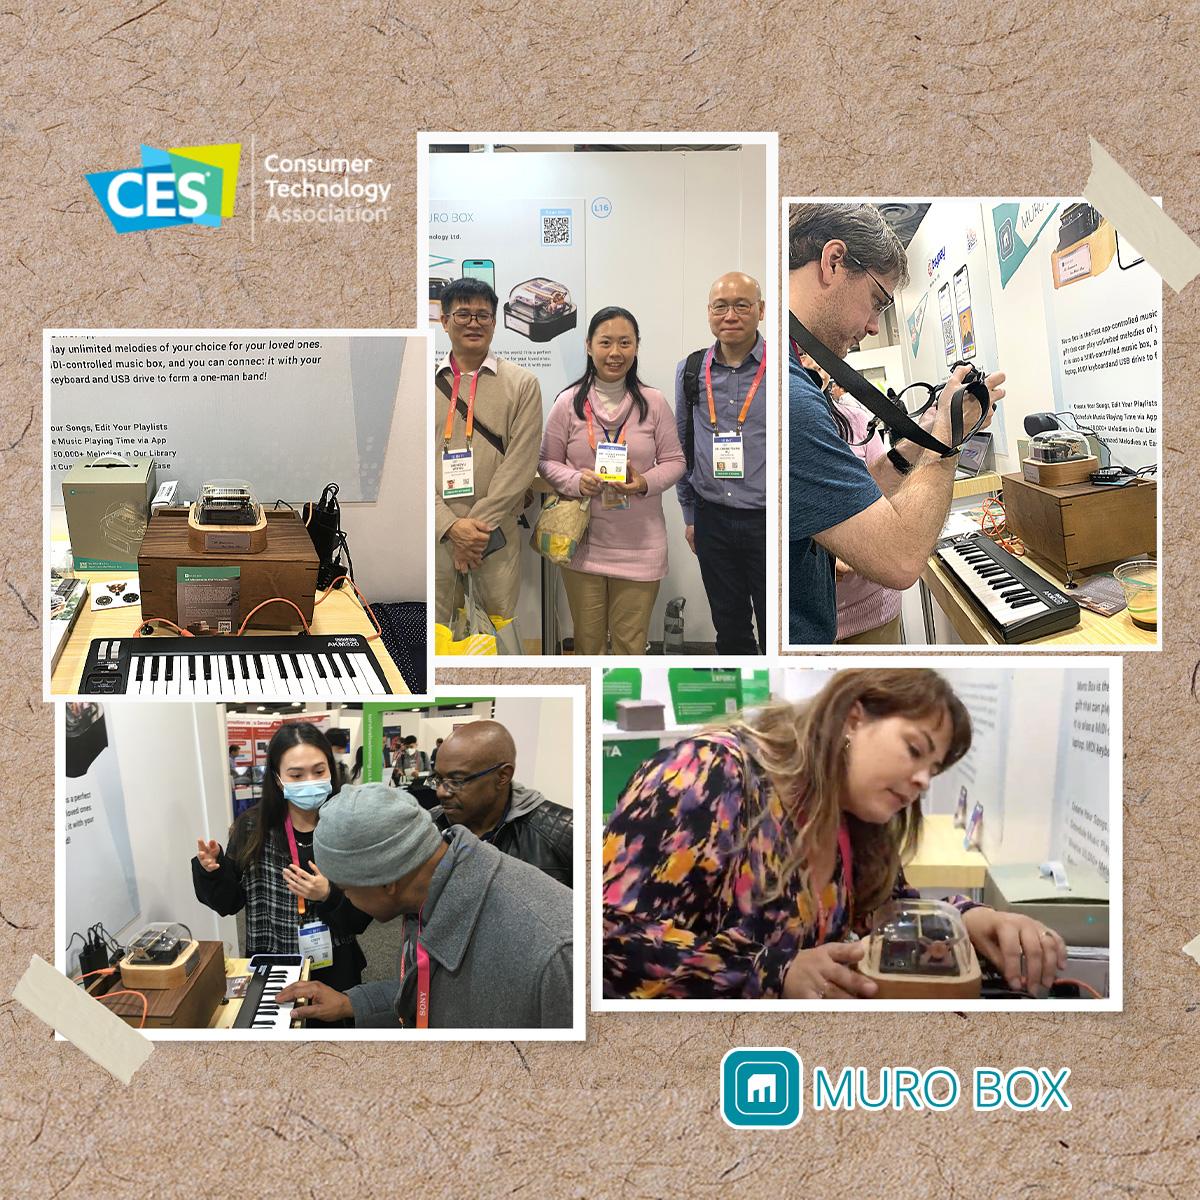 Muro Music Box received a lot of attention in CES